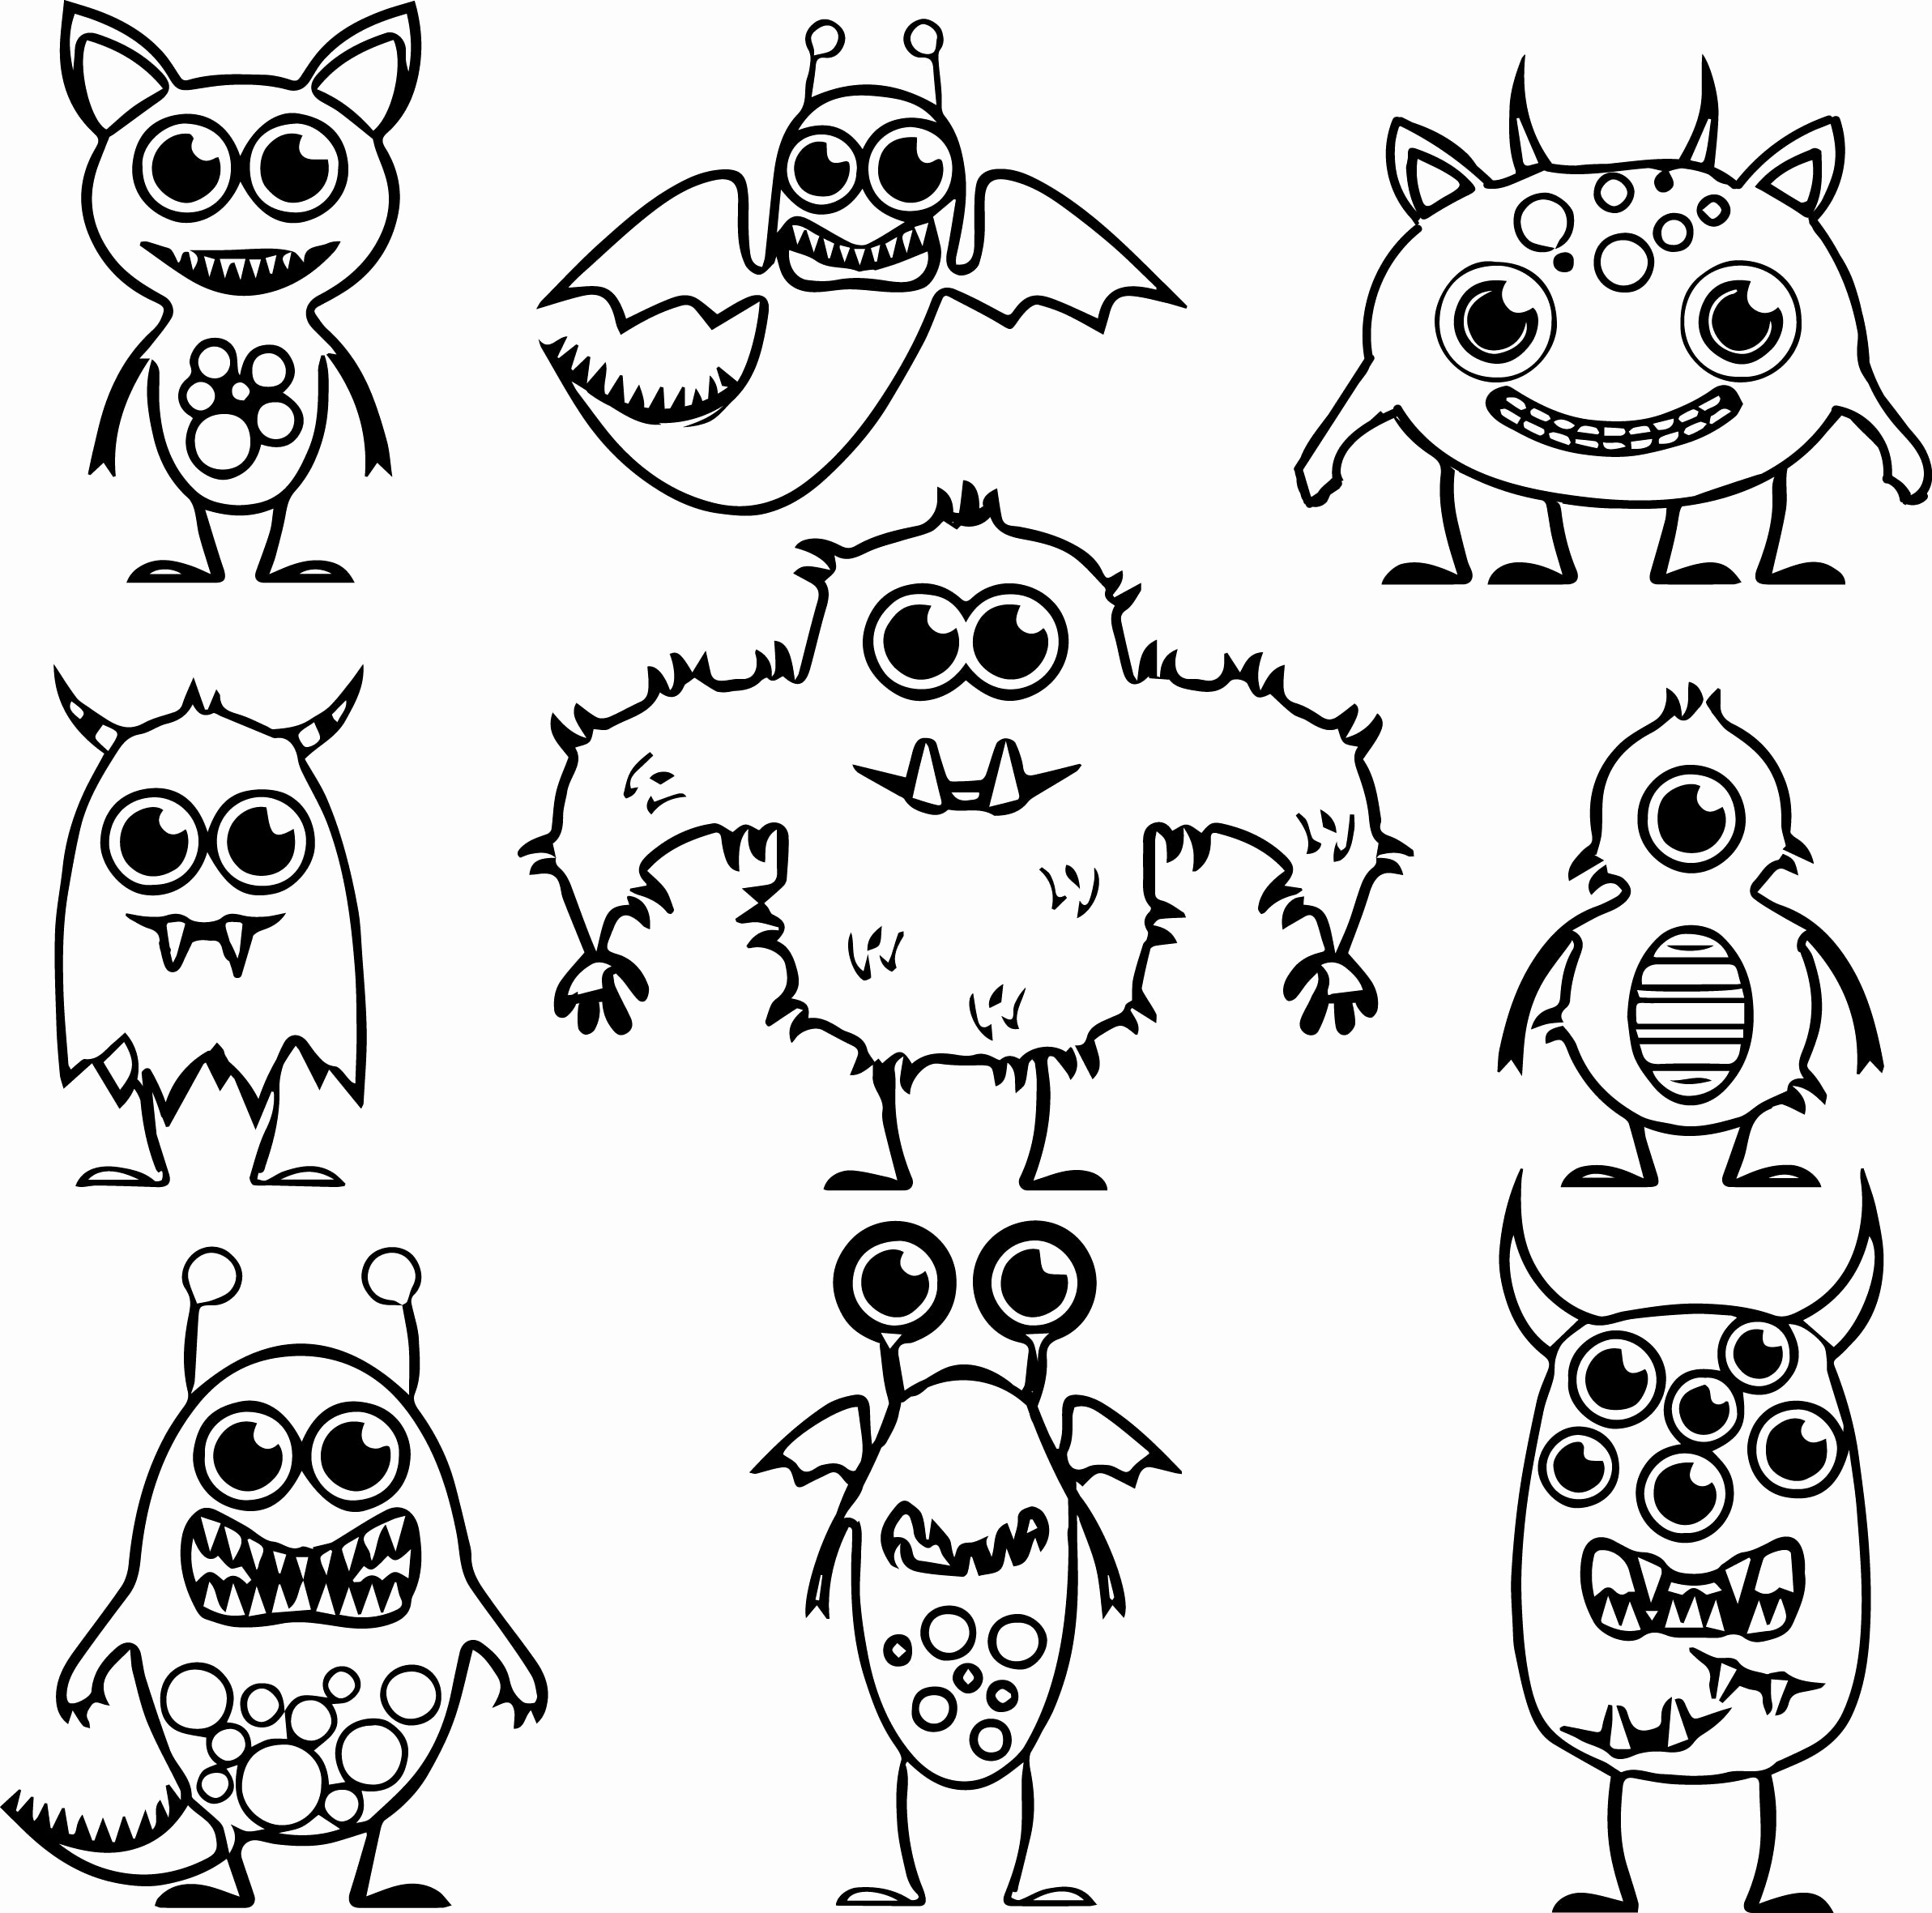 Toy Story Alien Coloring Page at GetDrawings Free download